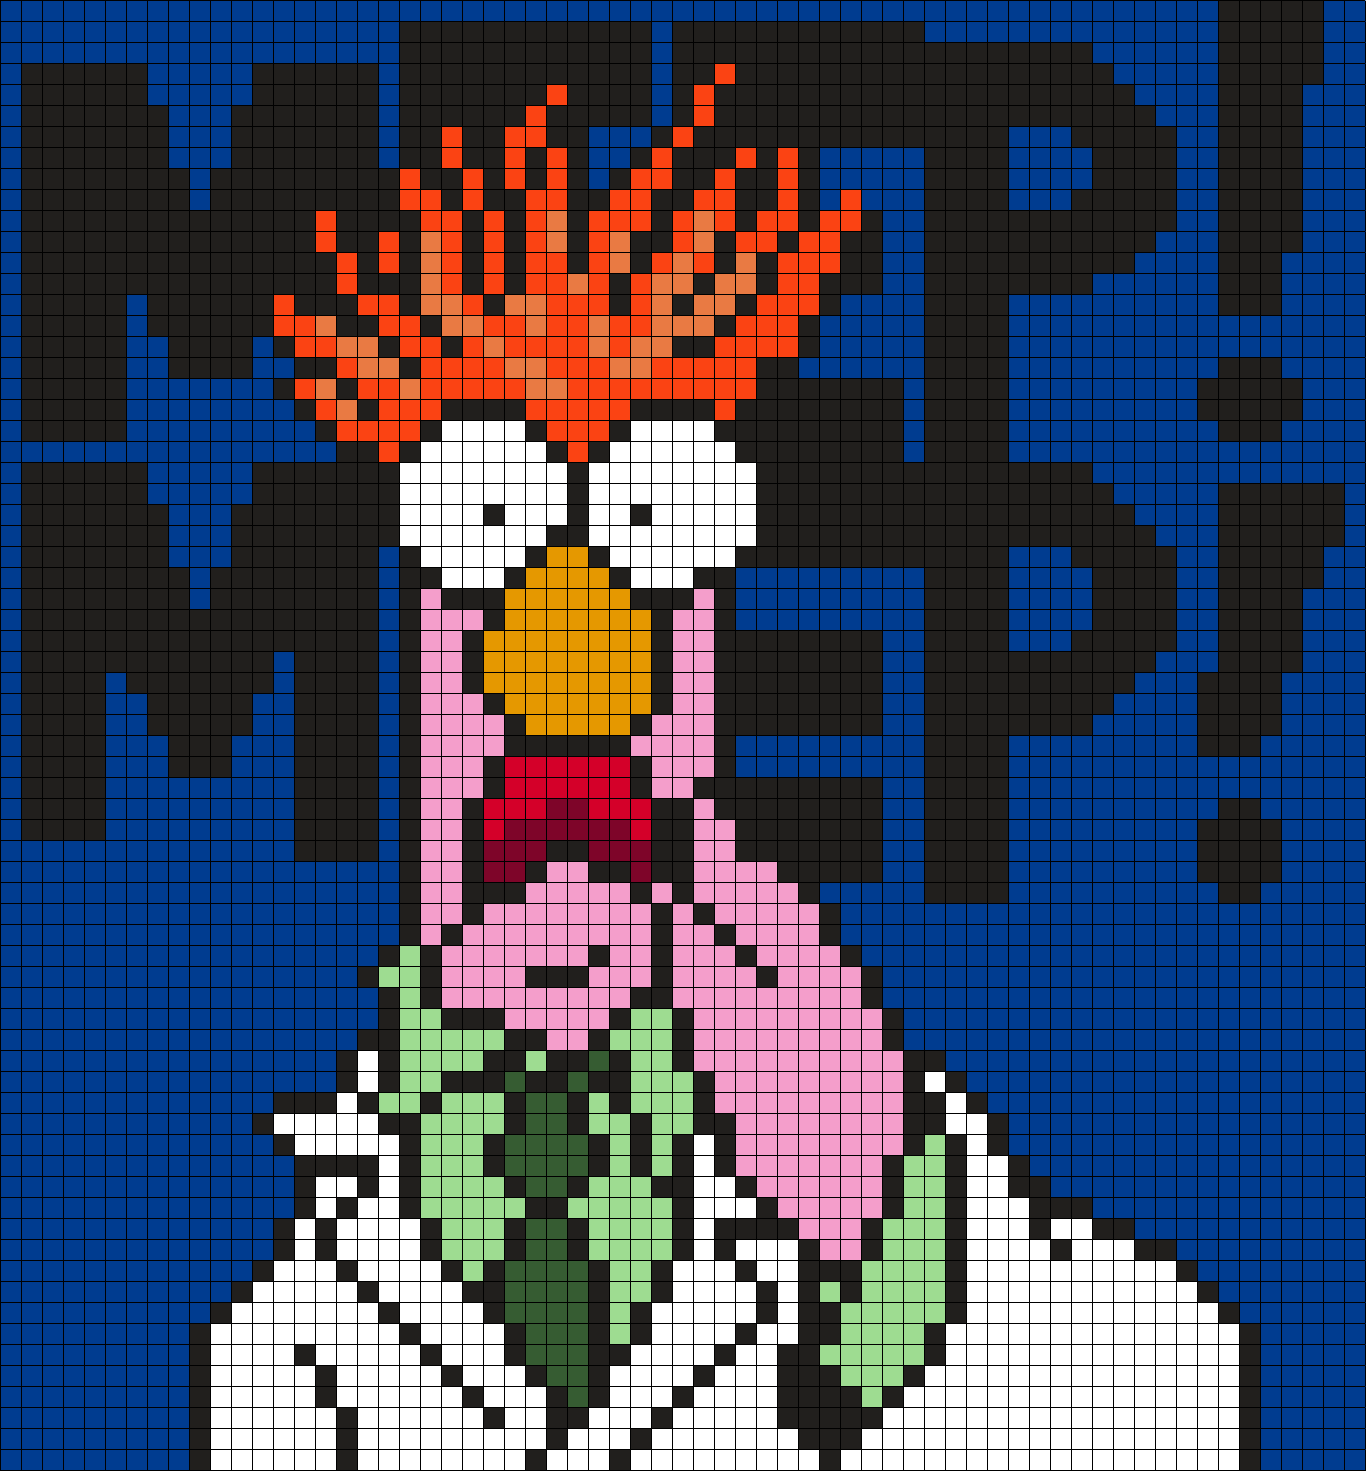 Beaker From The Muppets (Square)